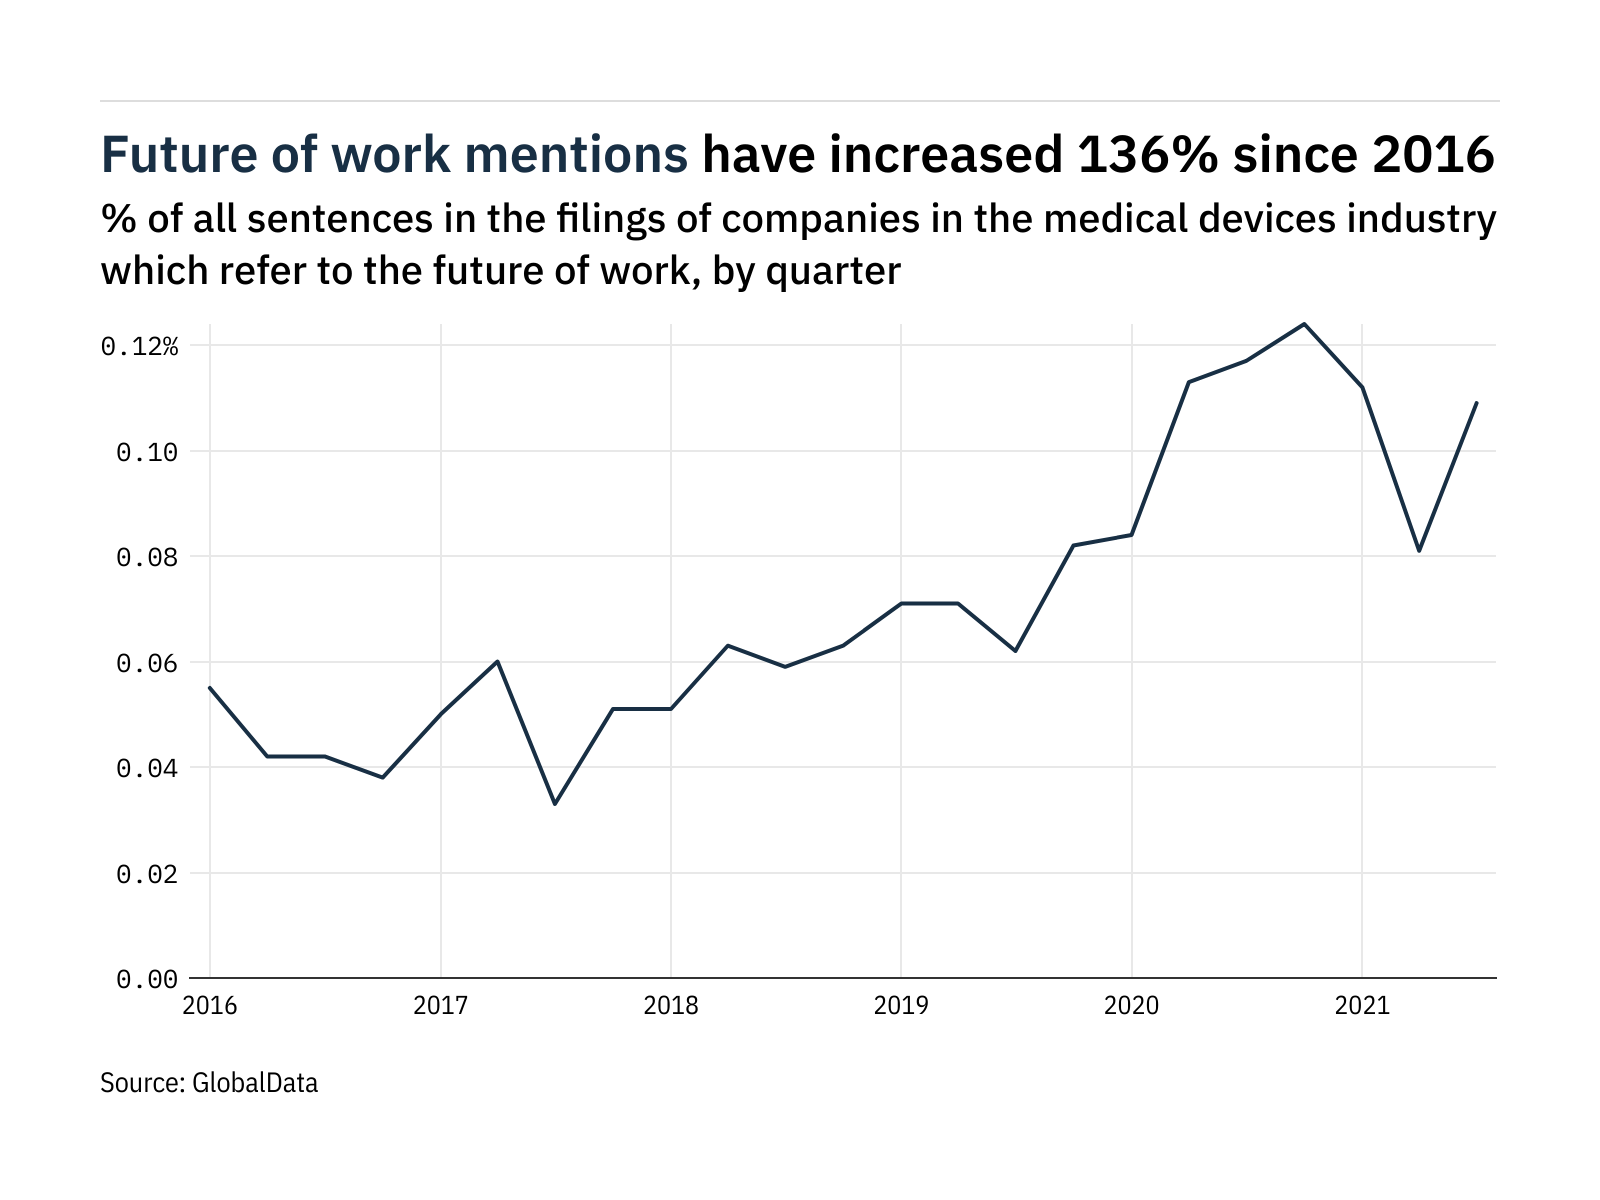 Filings buzz in the medical devices industry: 35% increase in the future of work mentions in Q3 of 2021